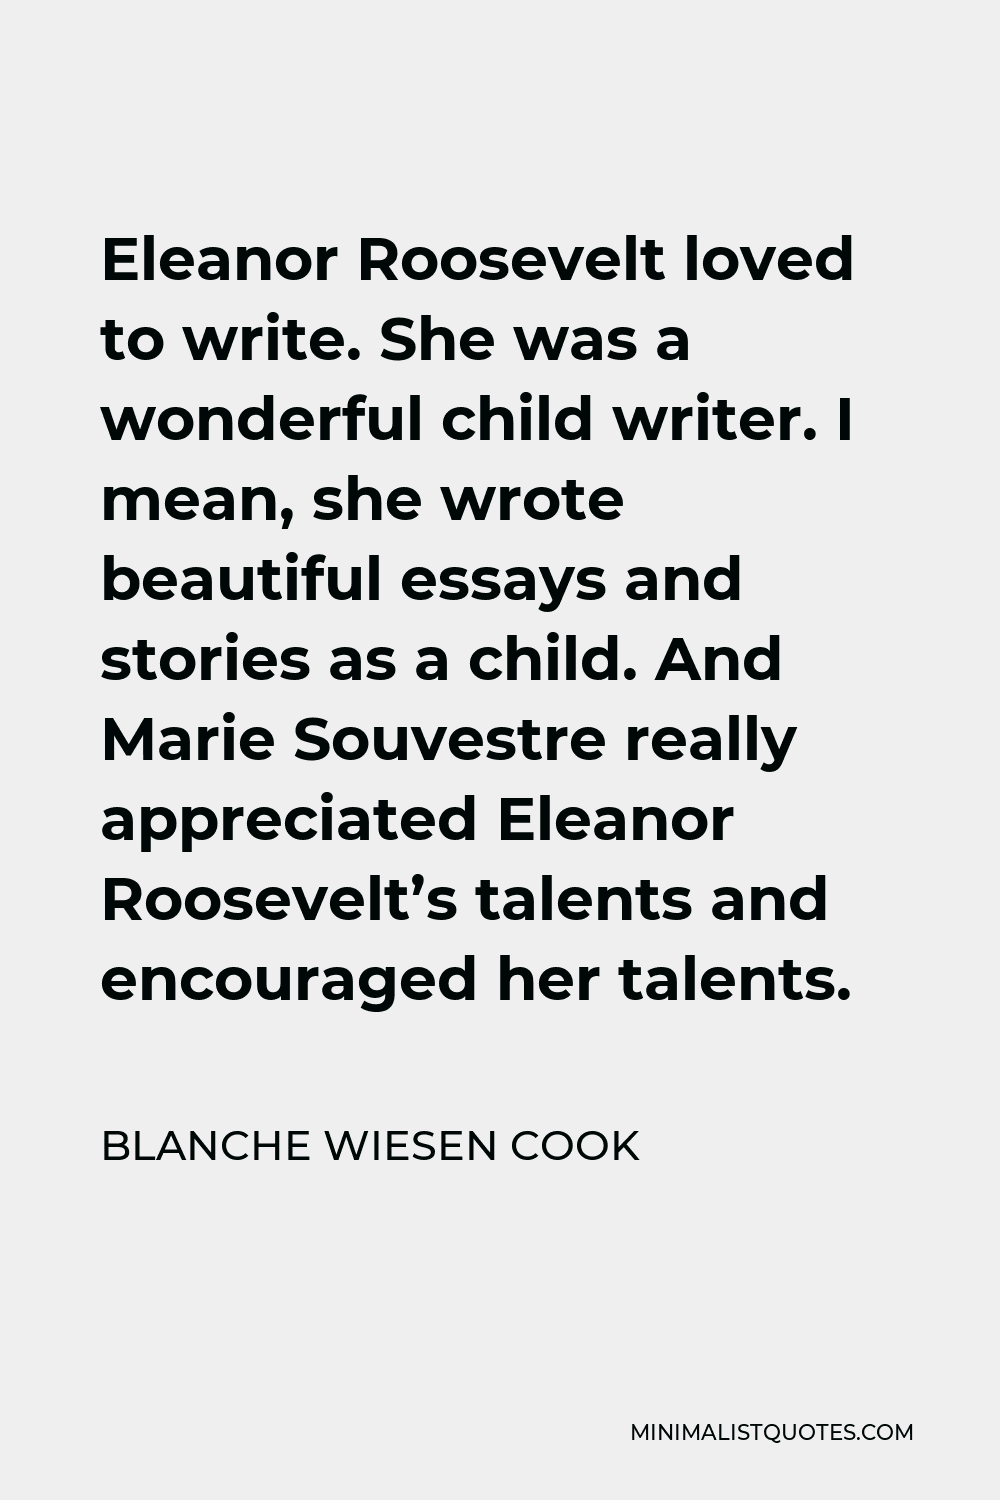 Blanche Wiesen Cook Quote - Eleanor Roosevelt loved to write. She was a wonderful child writer. I mean, she wrote beautiful essays and stories as a child. And Marie Souvestre really appreciated Eleanor Roosevelt’s talents and encouraged her talents.